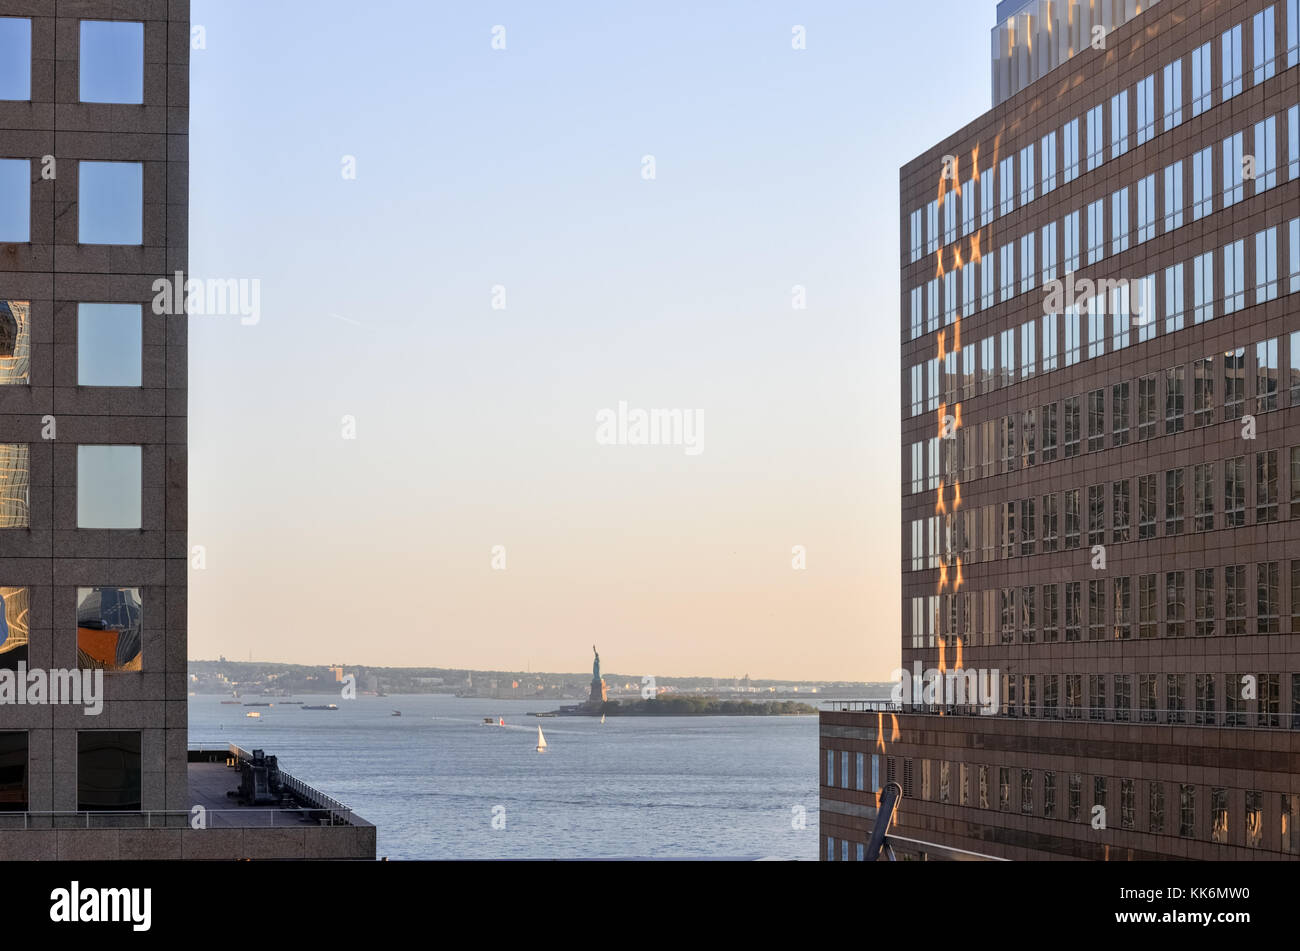 View of the Statue of Liberty from the World Financial Center in Lower Manhattan at dusk. Stock Photo